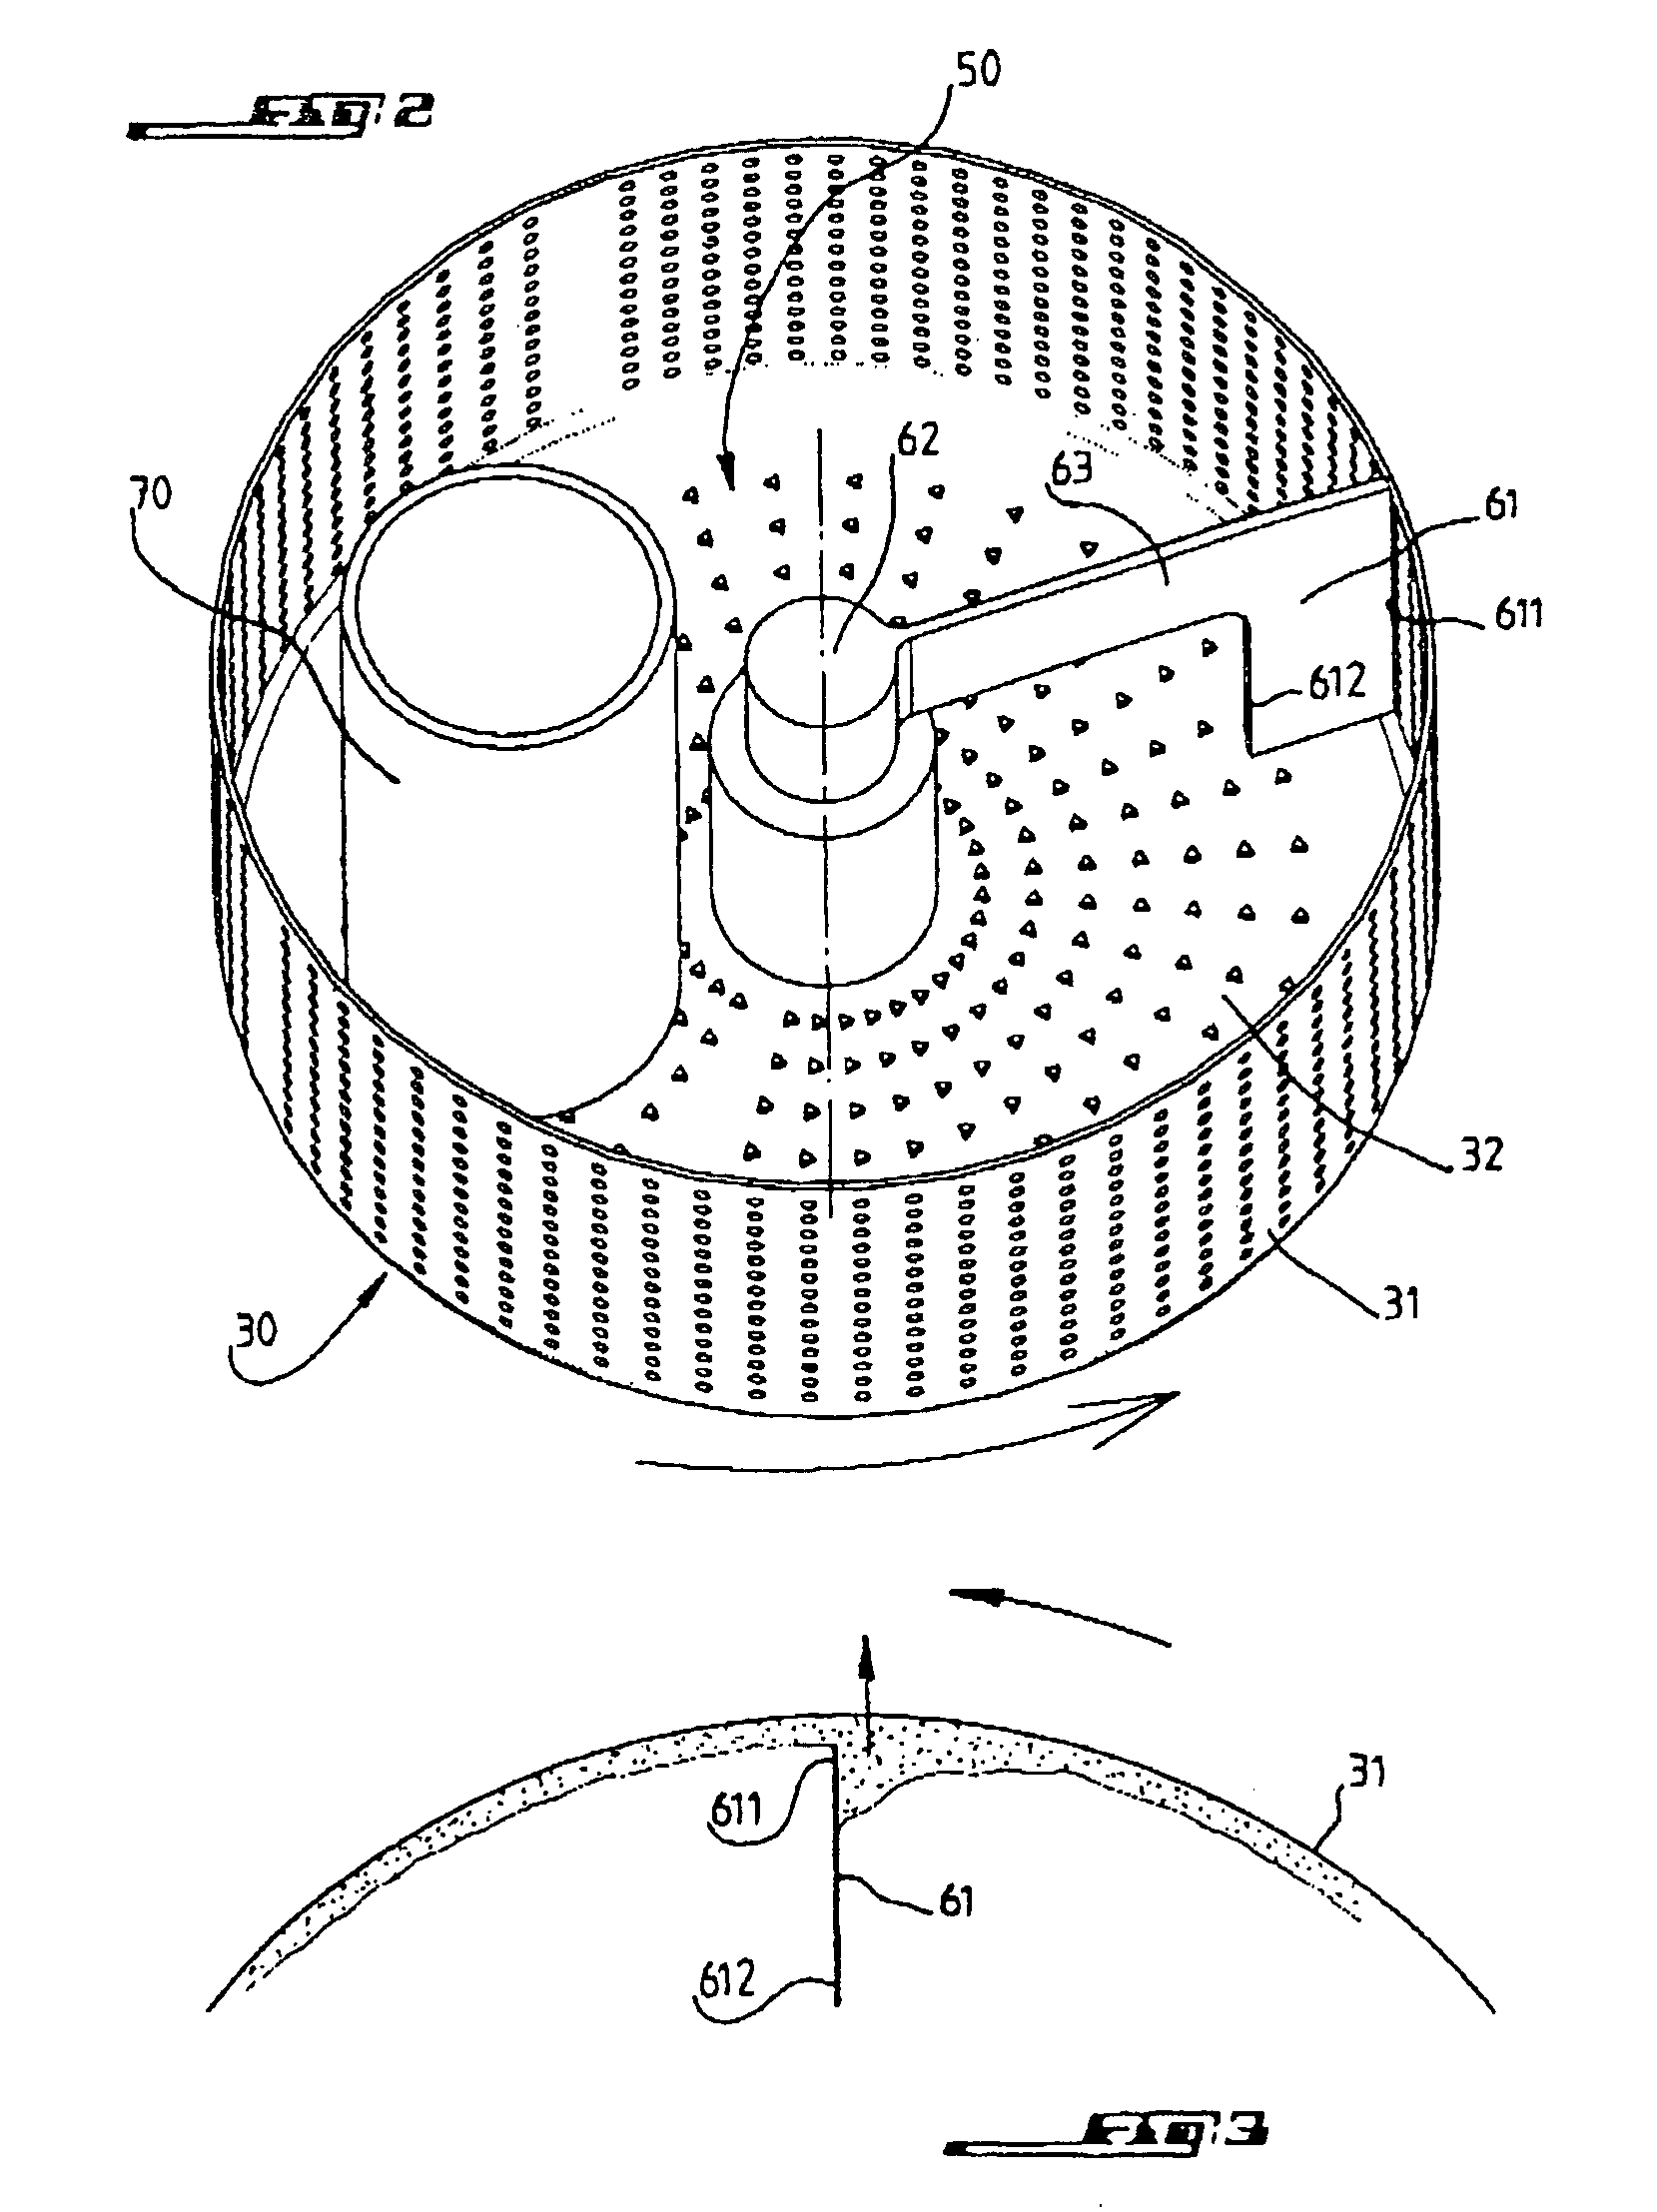 Apparatus for extraction of juice and pulp from plant products